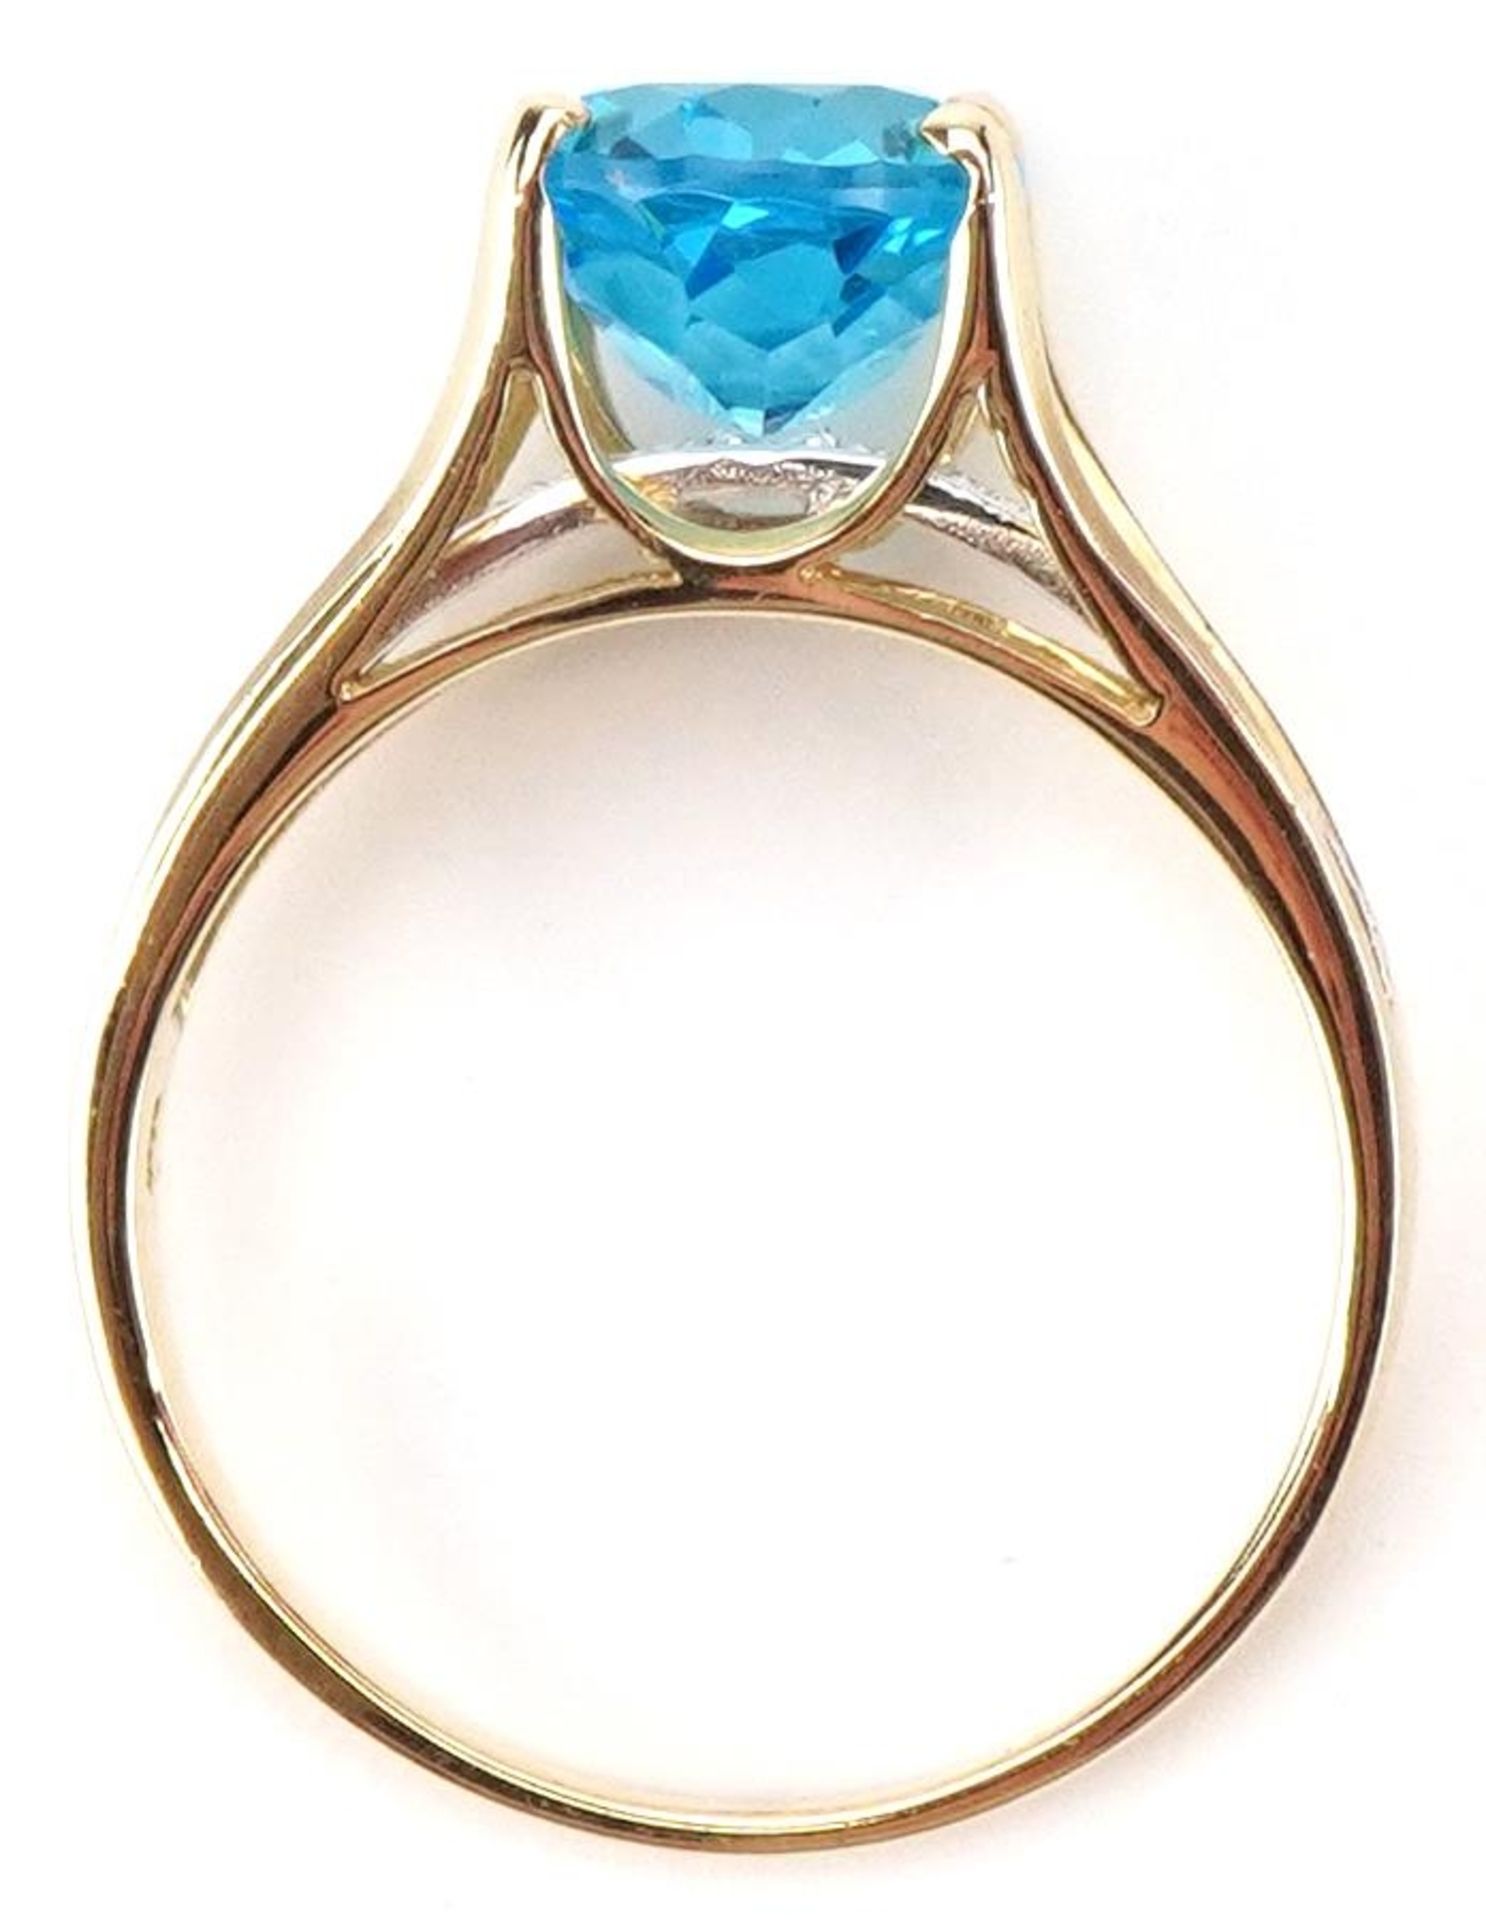 9ct gold blue topaz solitaire ring with diamond set shoulders, size P/Q, 3.3g - Image 3 of 5